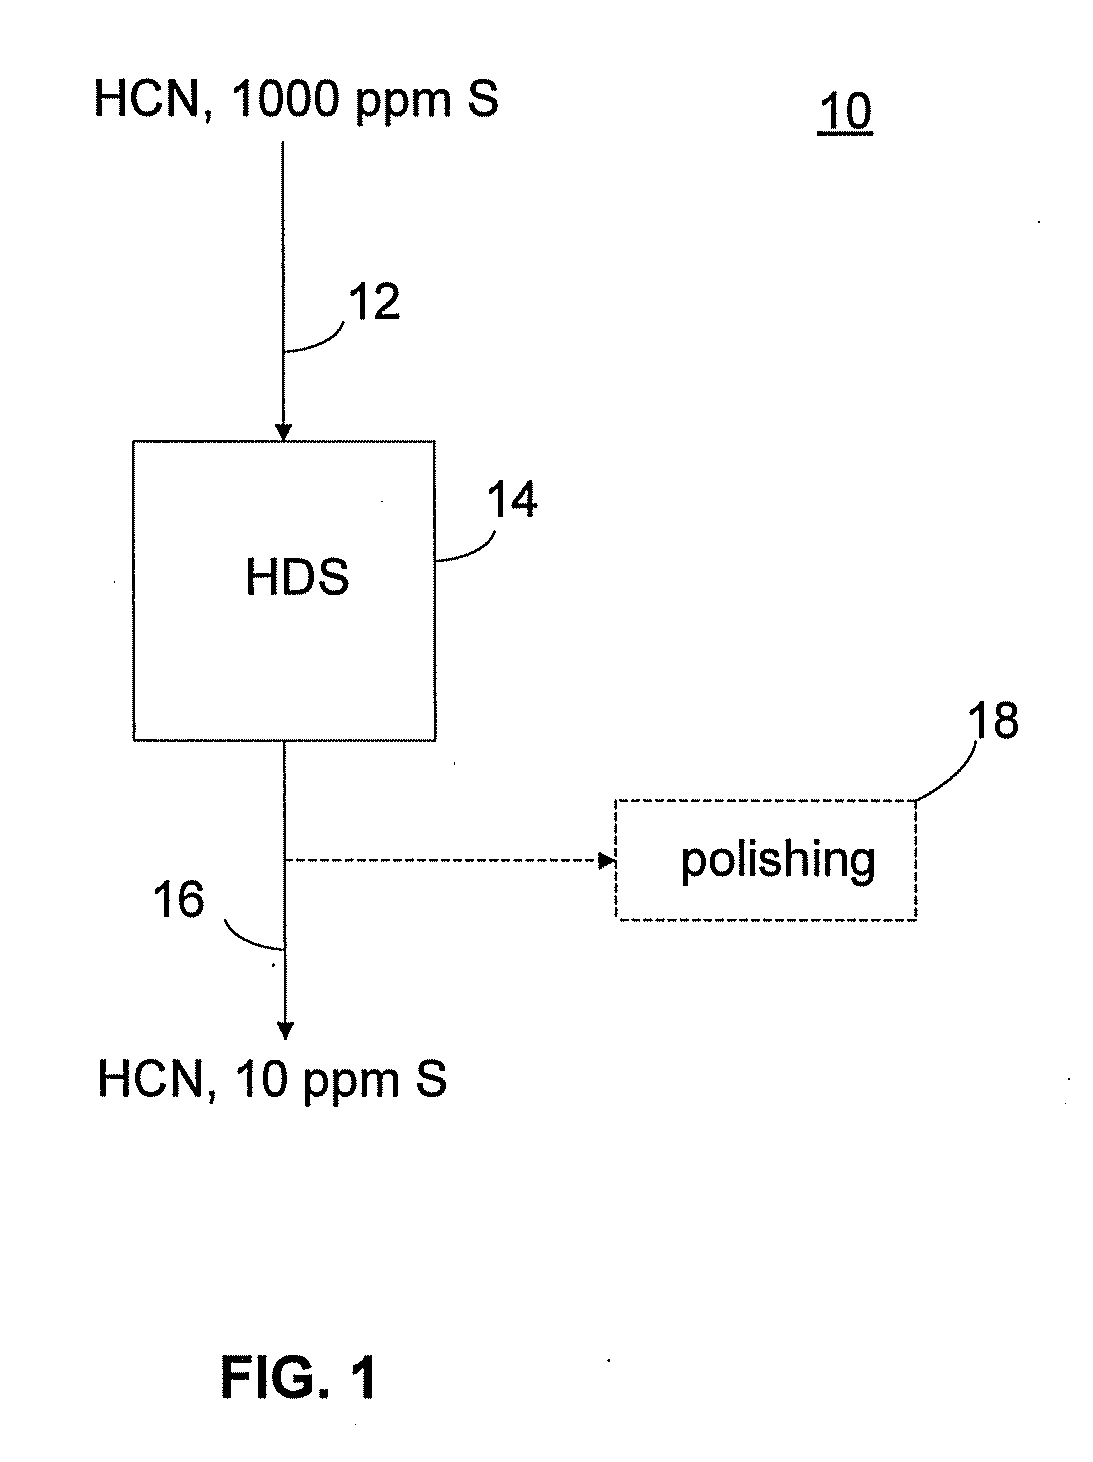 Process to produce low sulfur catalytically cracked gasoline without saturation of olefinic compounds